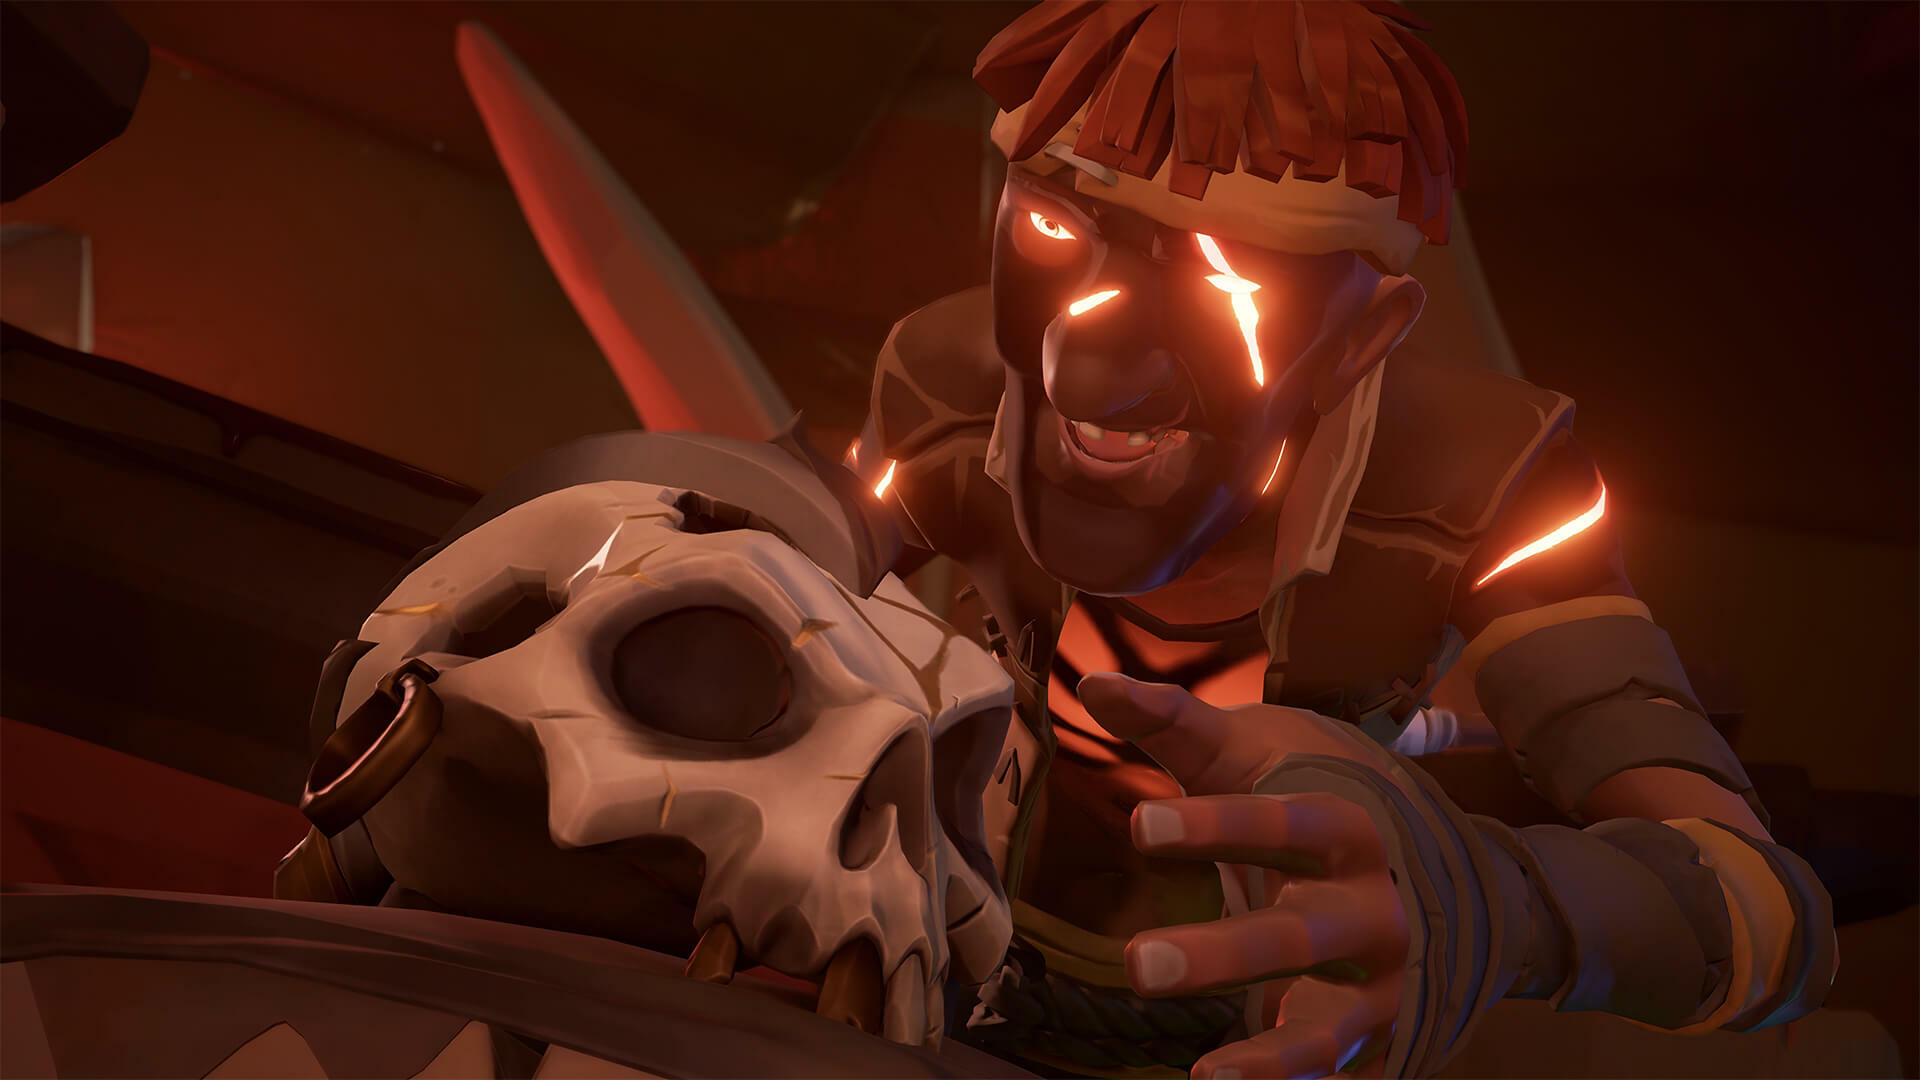 Sea of Thieves Server Status - Are The Servers Down February 10 2022 -  Fortnite Insider